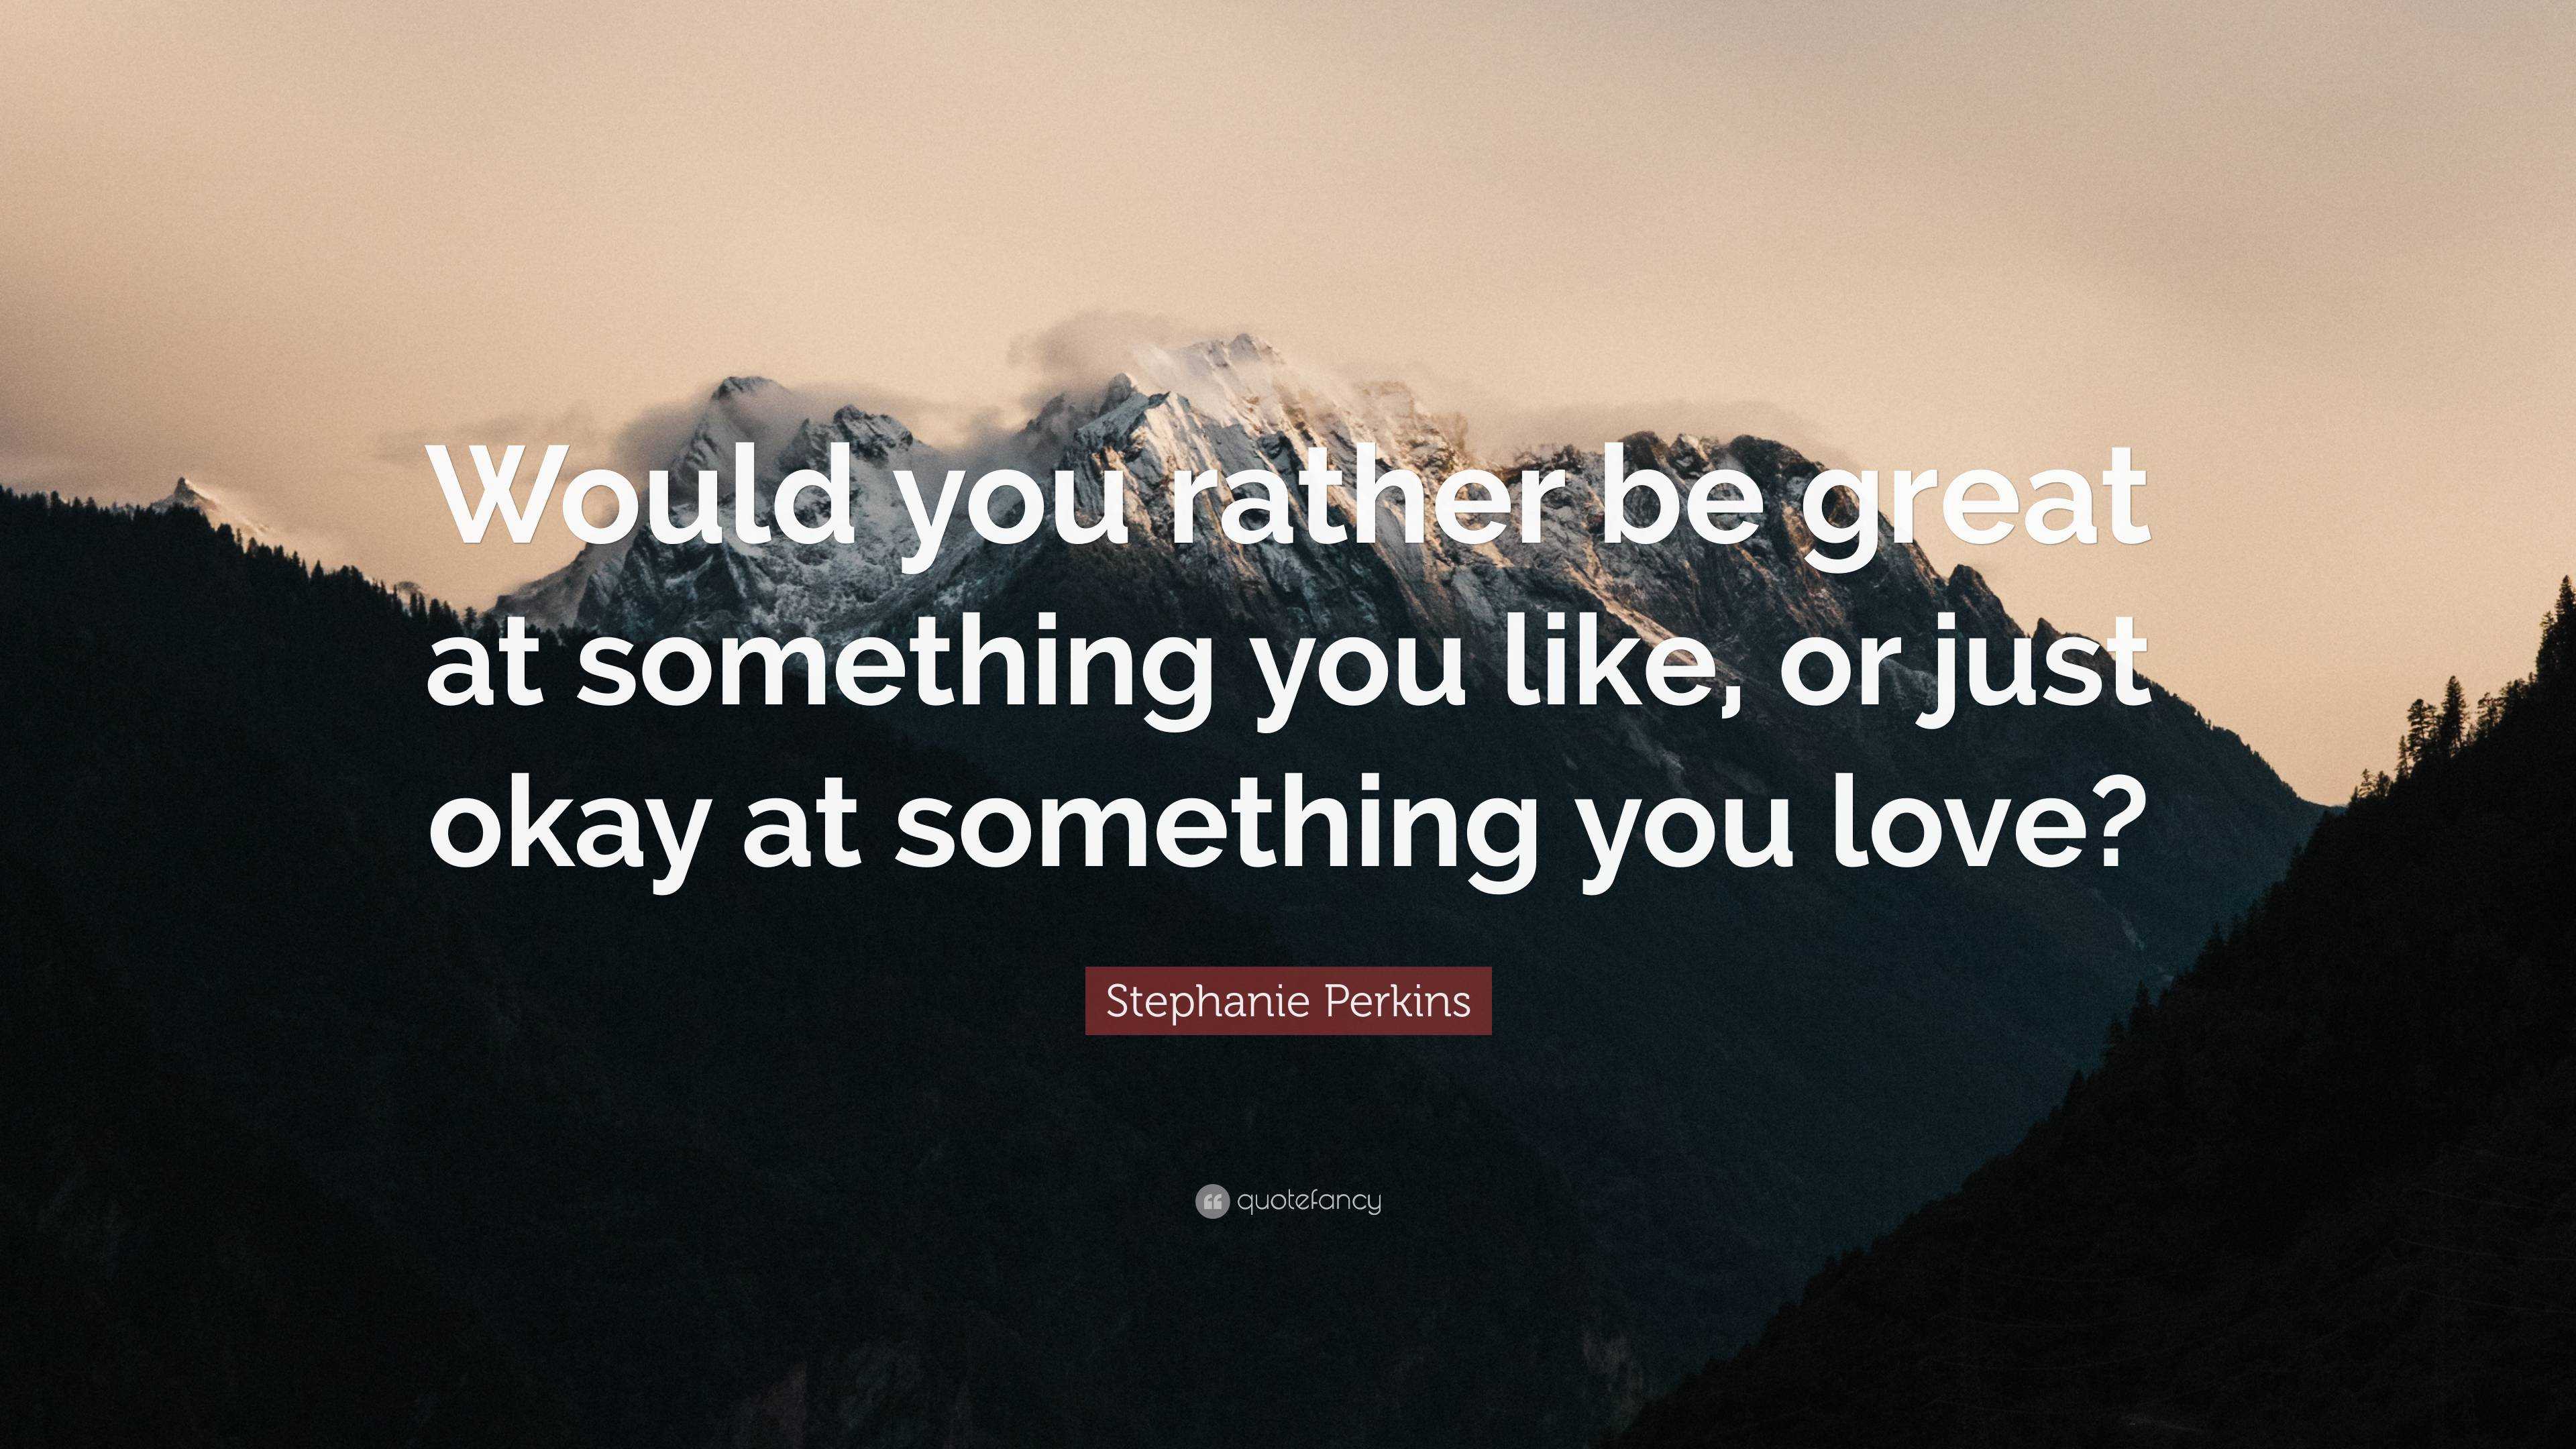 Stephanie Perkins Quote: “Would you rather be great at something you ...